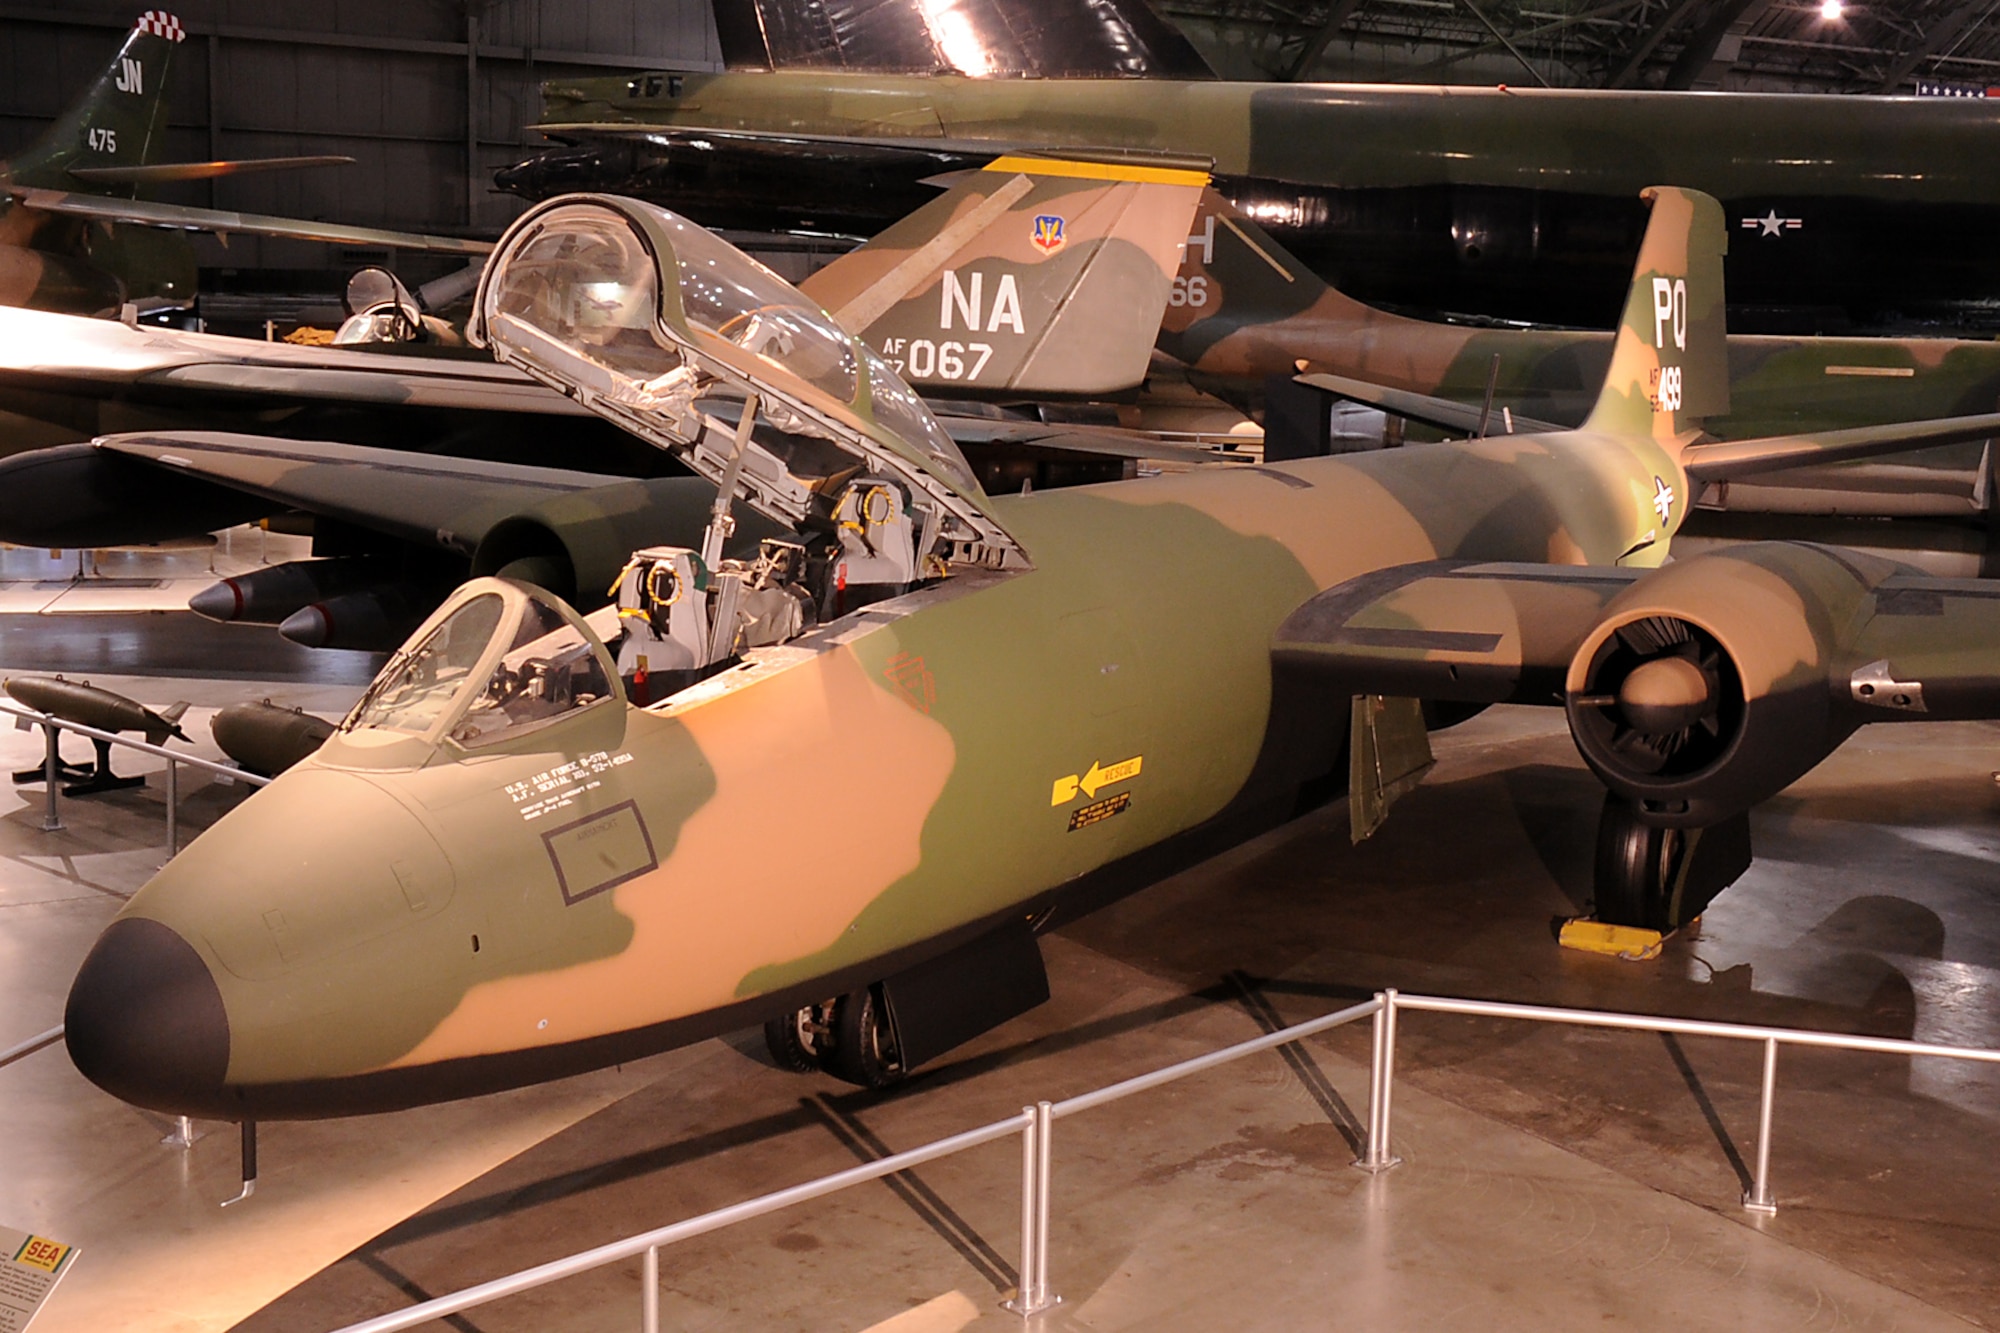 DAYTON, Ohio - Martin B-57 in the Southeast Asia War Gallery at the National Museum of the United States Air Force. (U.S. Air Force photo) 
